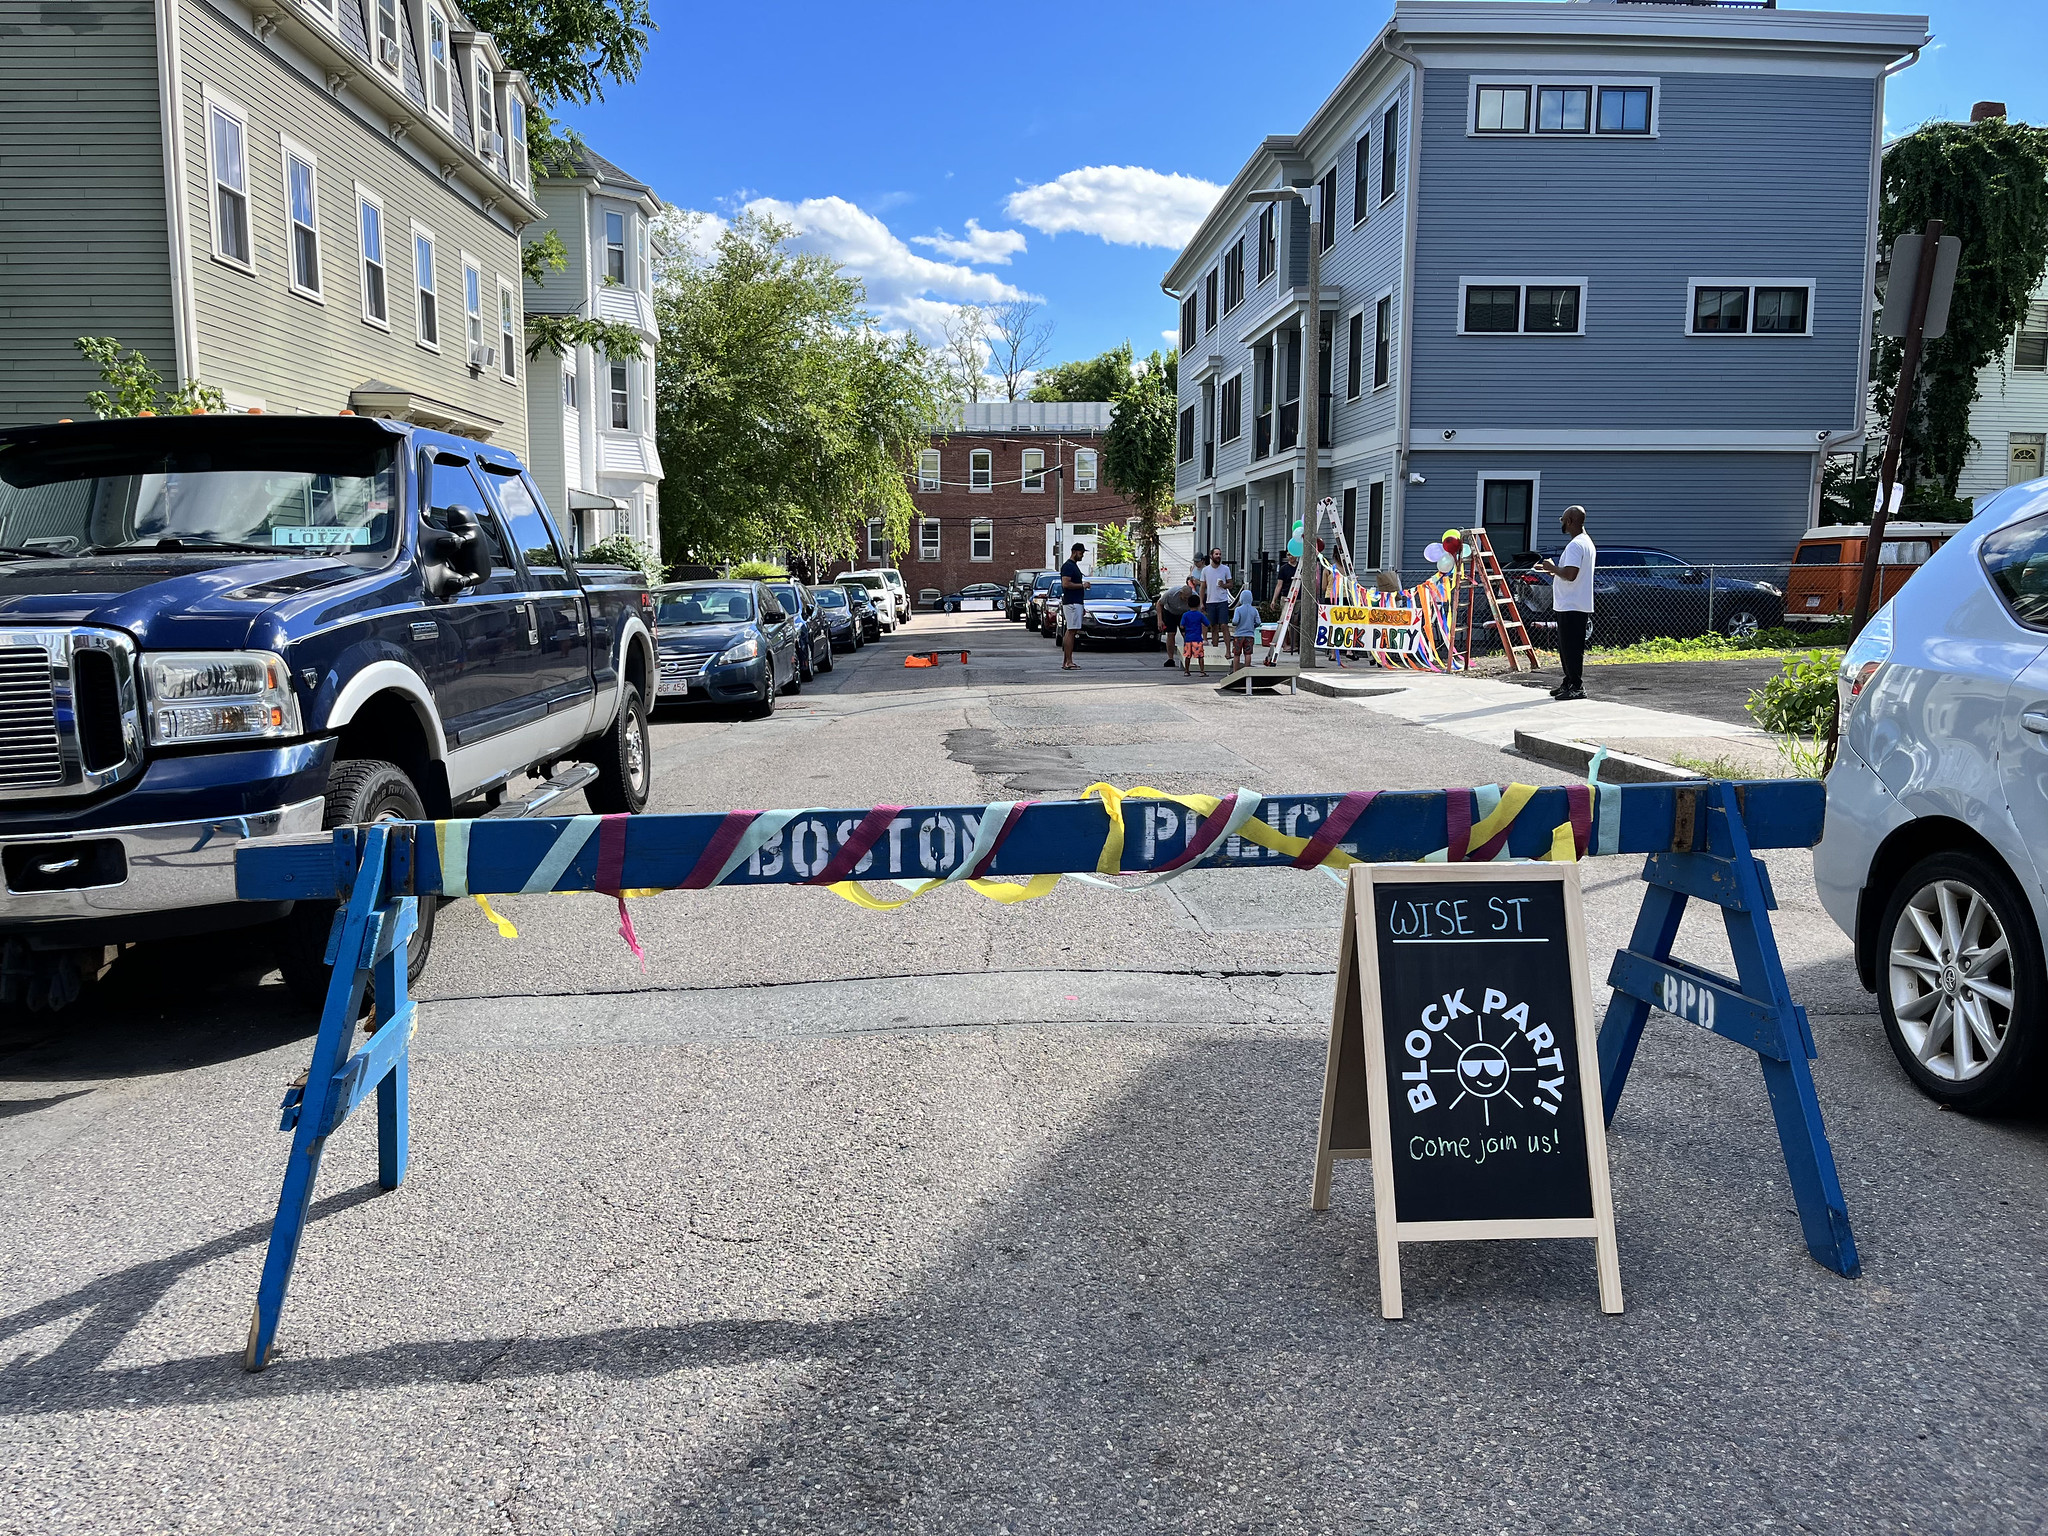 A decorated street divider sits in front of a block party alongside an a-frame sign that reads Wise St. Block Party Come join us!